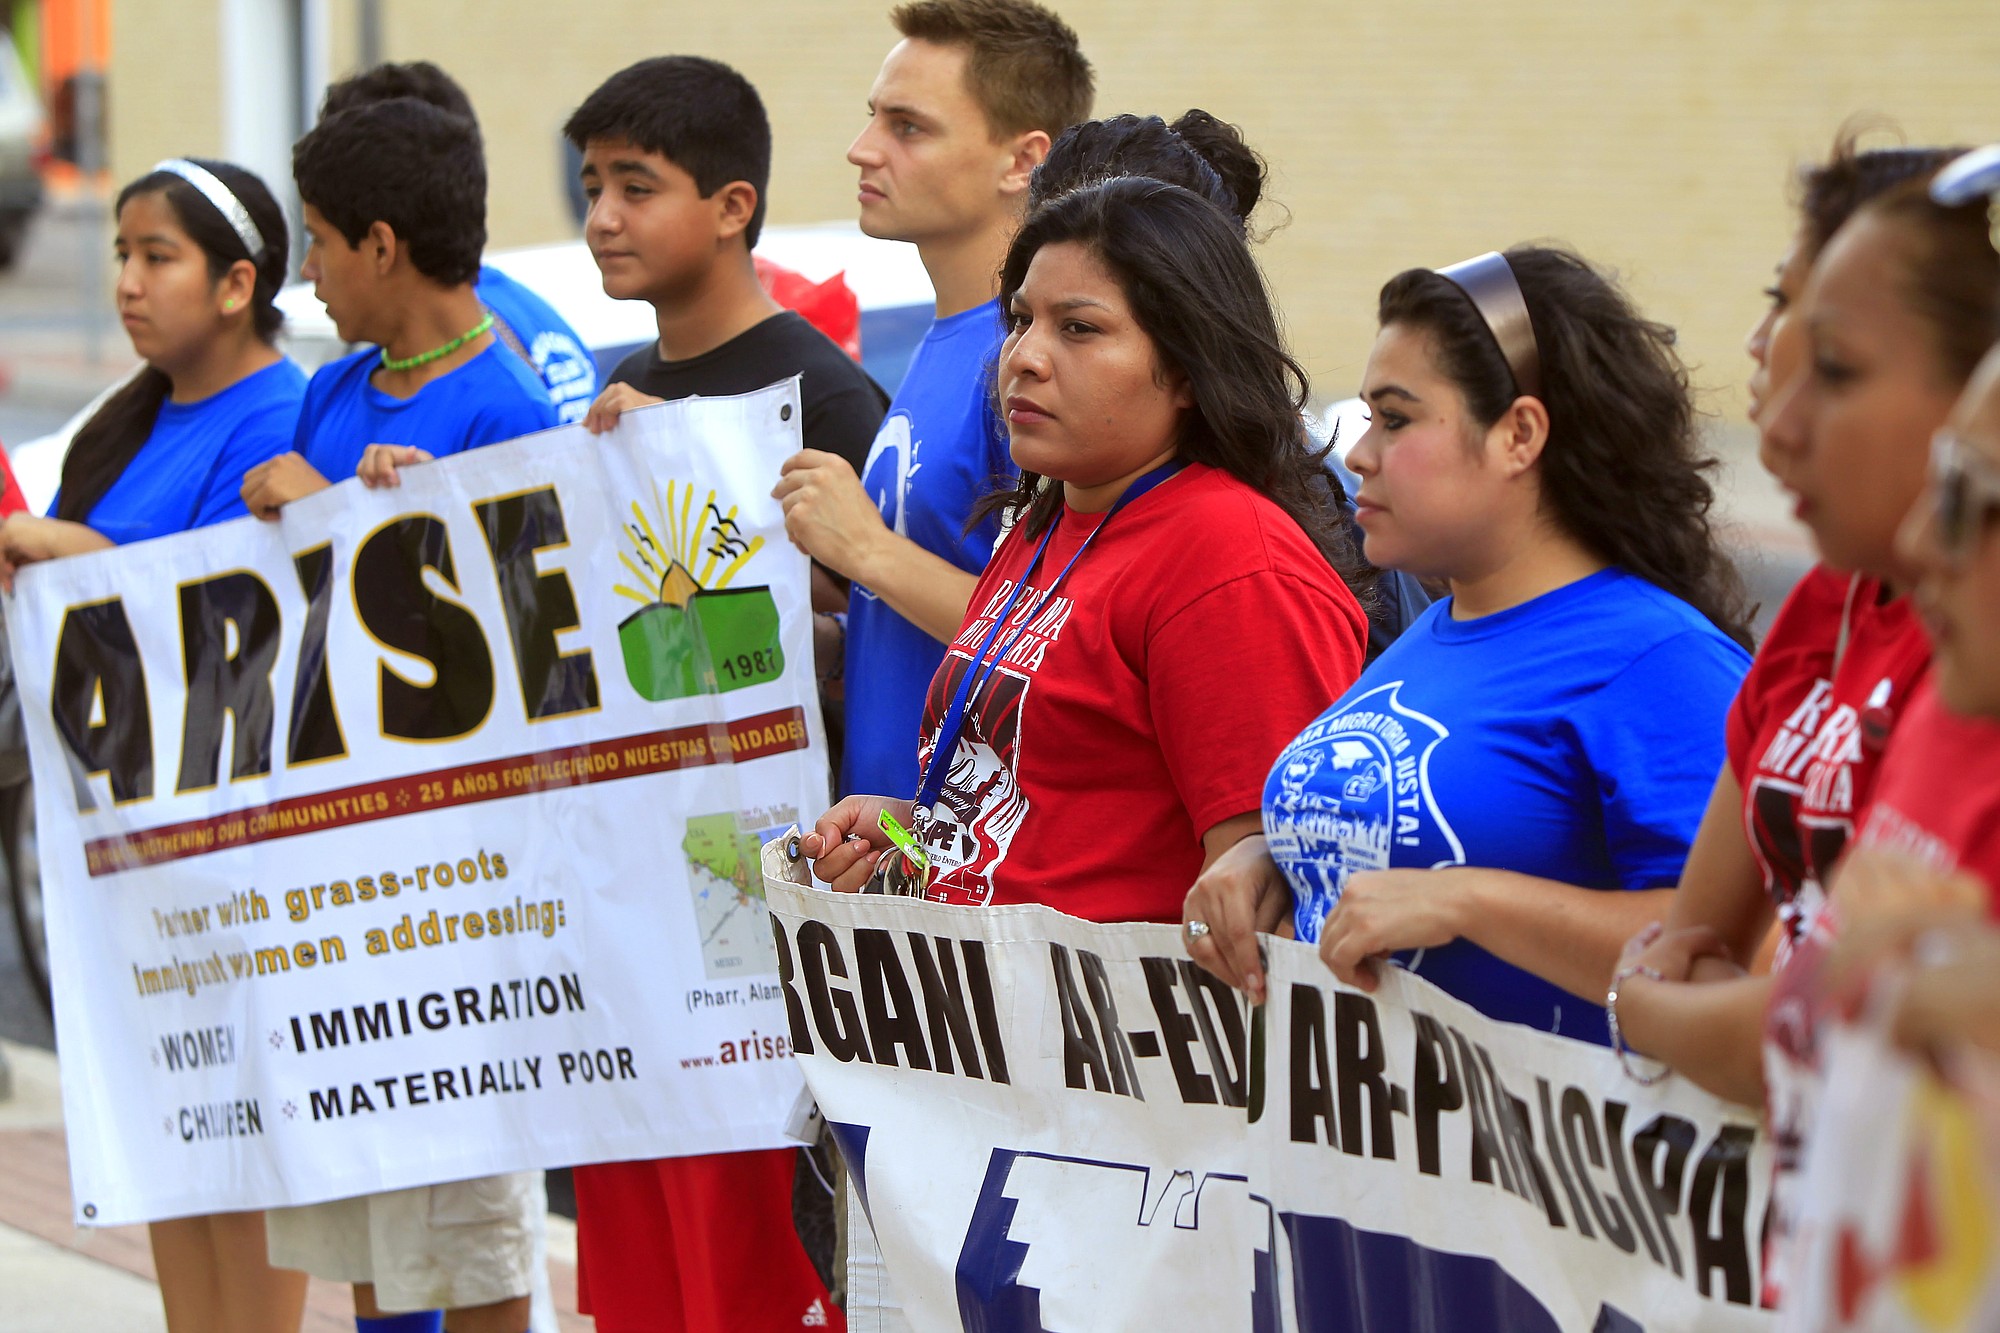 Immigrant advocates attend a vigil to show support for the refugee children and families arriving in the Rio Grande Valley and to draw attention to the causes and solutions to the refugee crisis Friday at the Sacred Heart Catholic Church in McAllen, Texas.